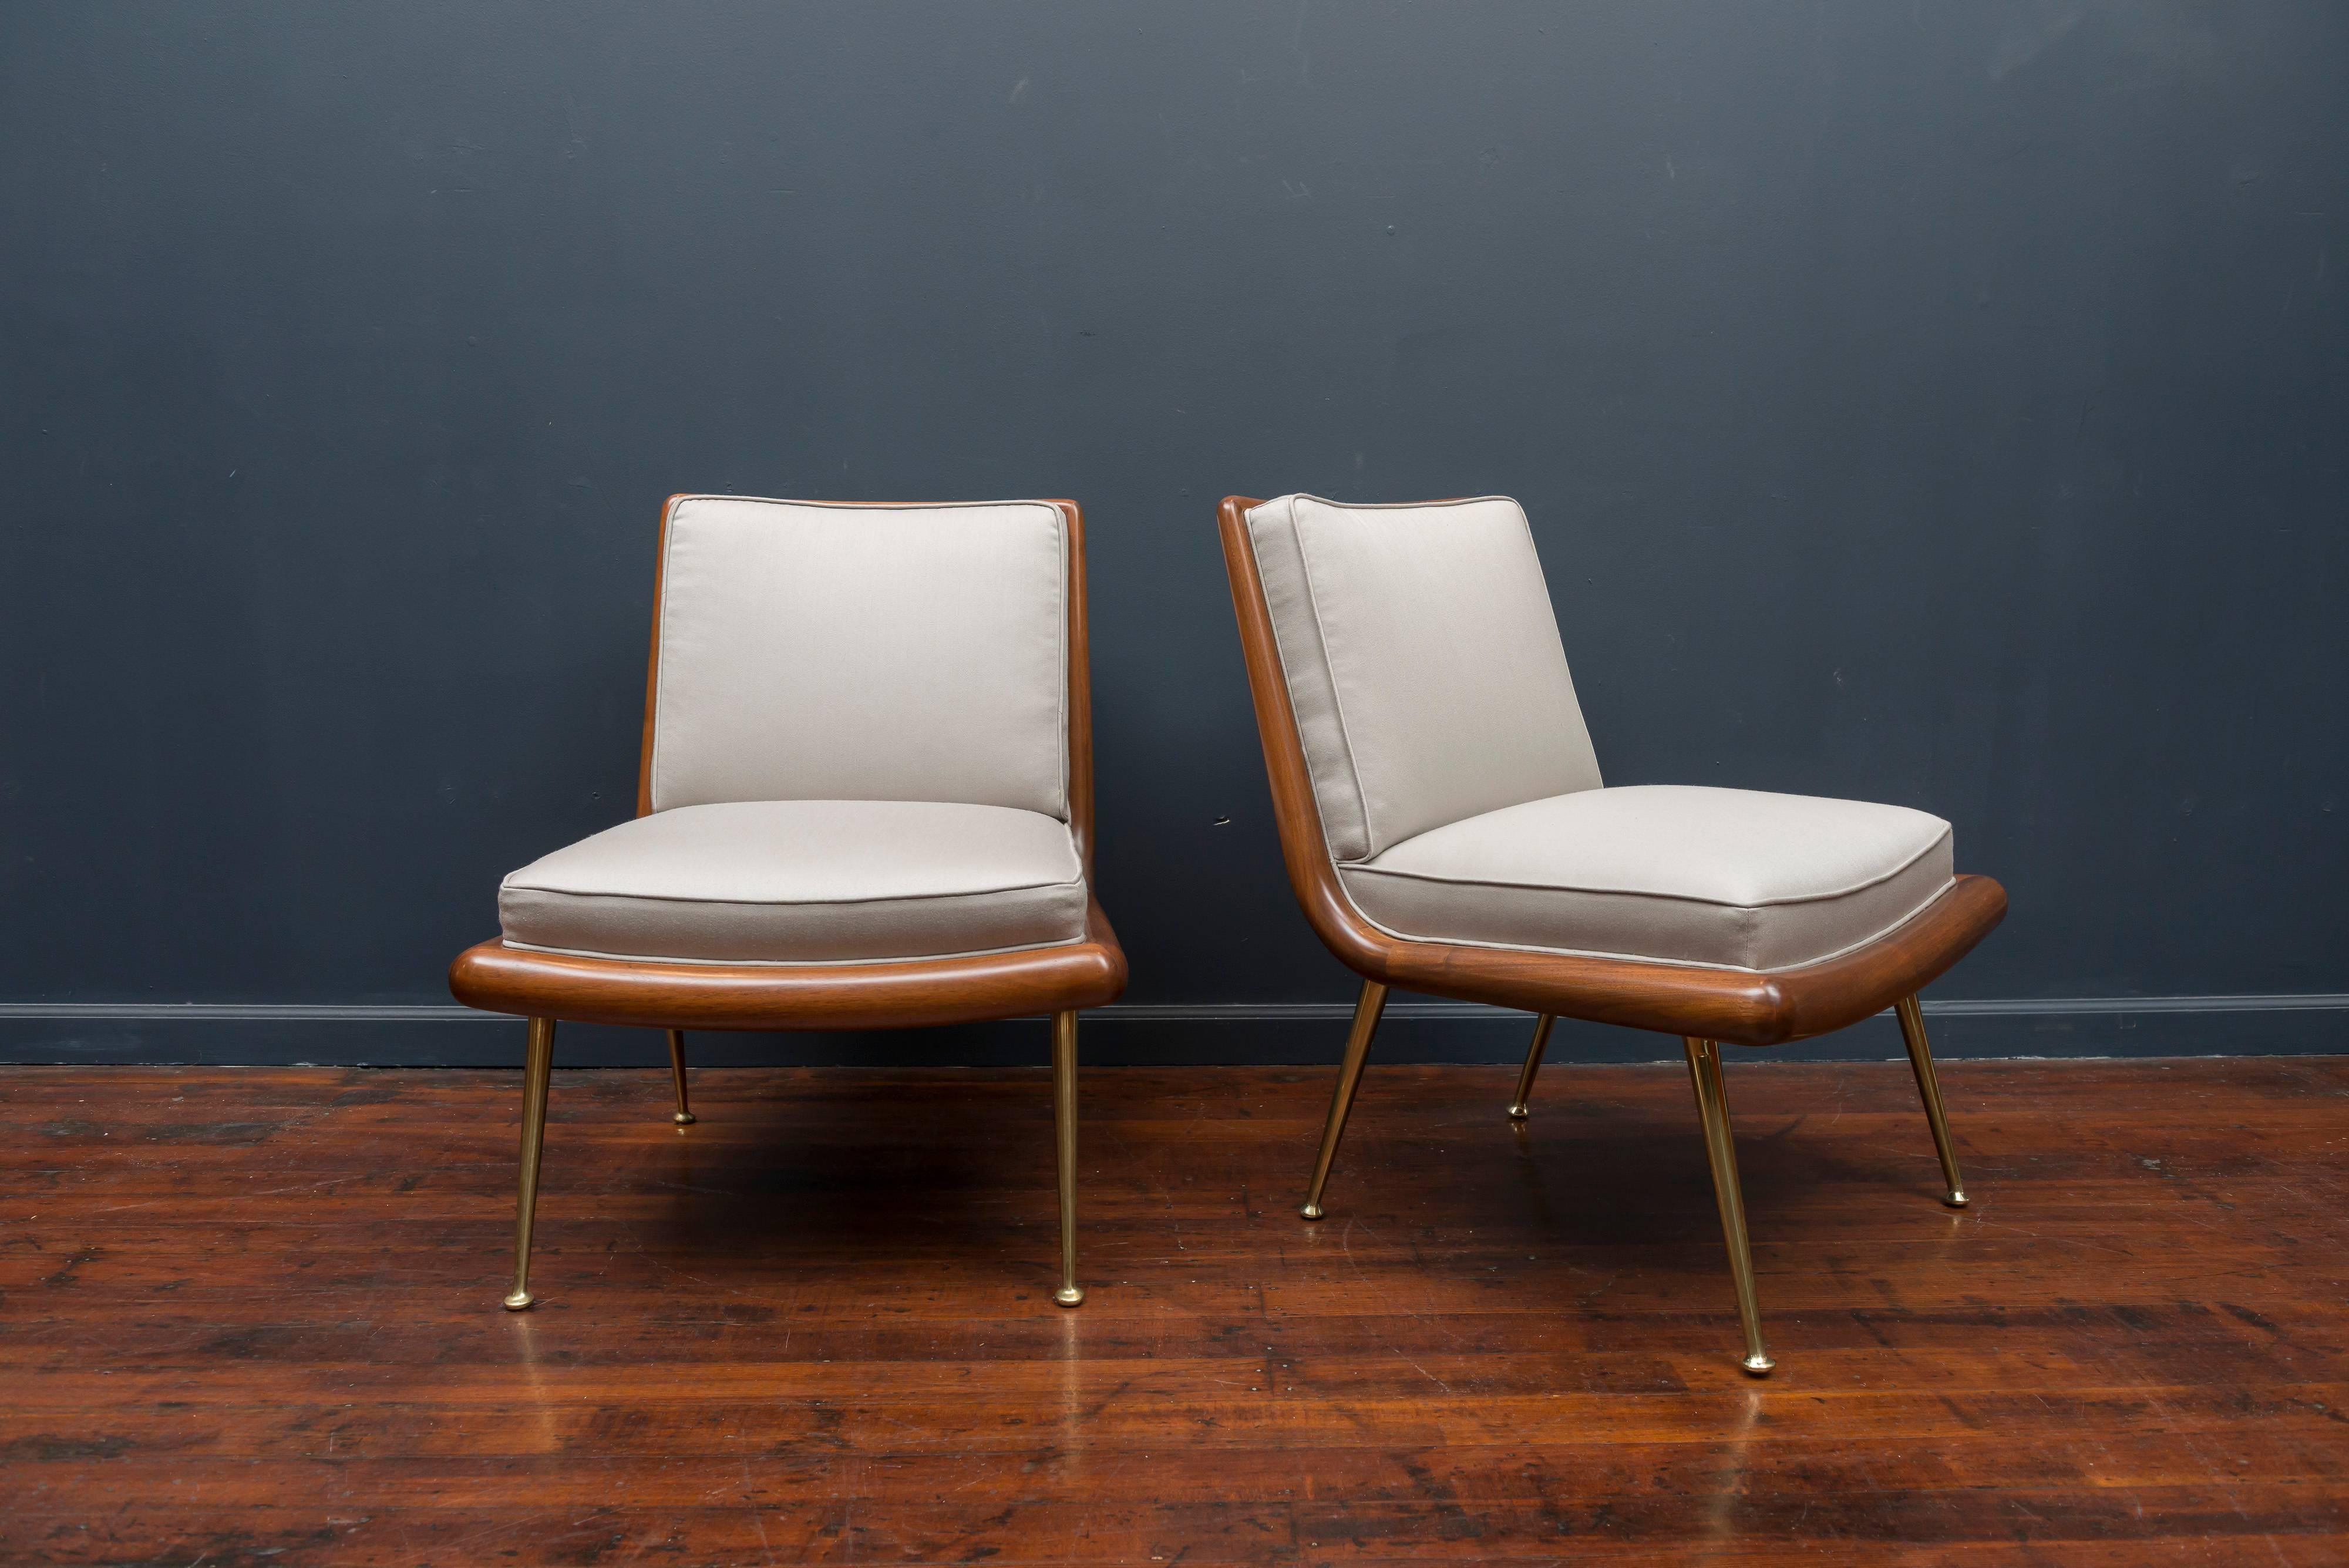 Rare pair of T.H. Robsjohn-Gibbings design lounge chairs for Widdicomb Furniture Co. Newly refinished walnut bull nose frames on polished brass telescoping legs. New light silver Maharam satin wool upholstery.